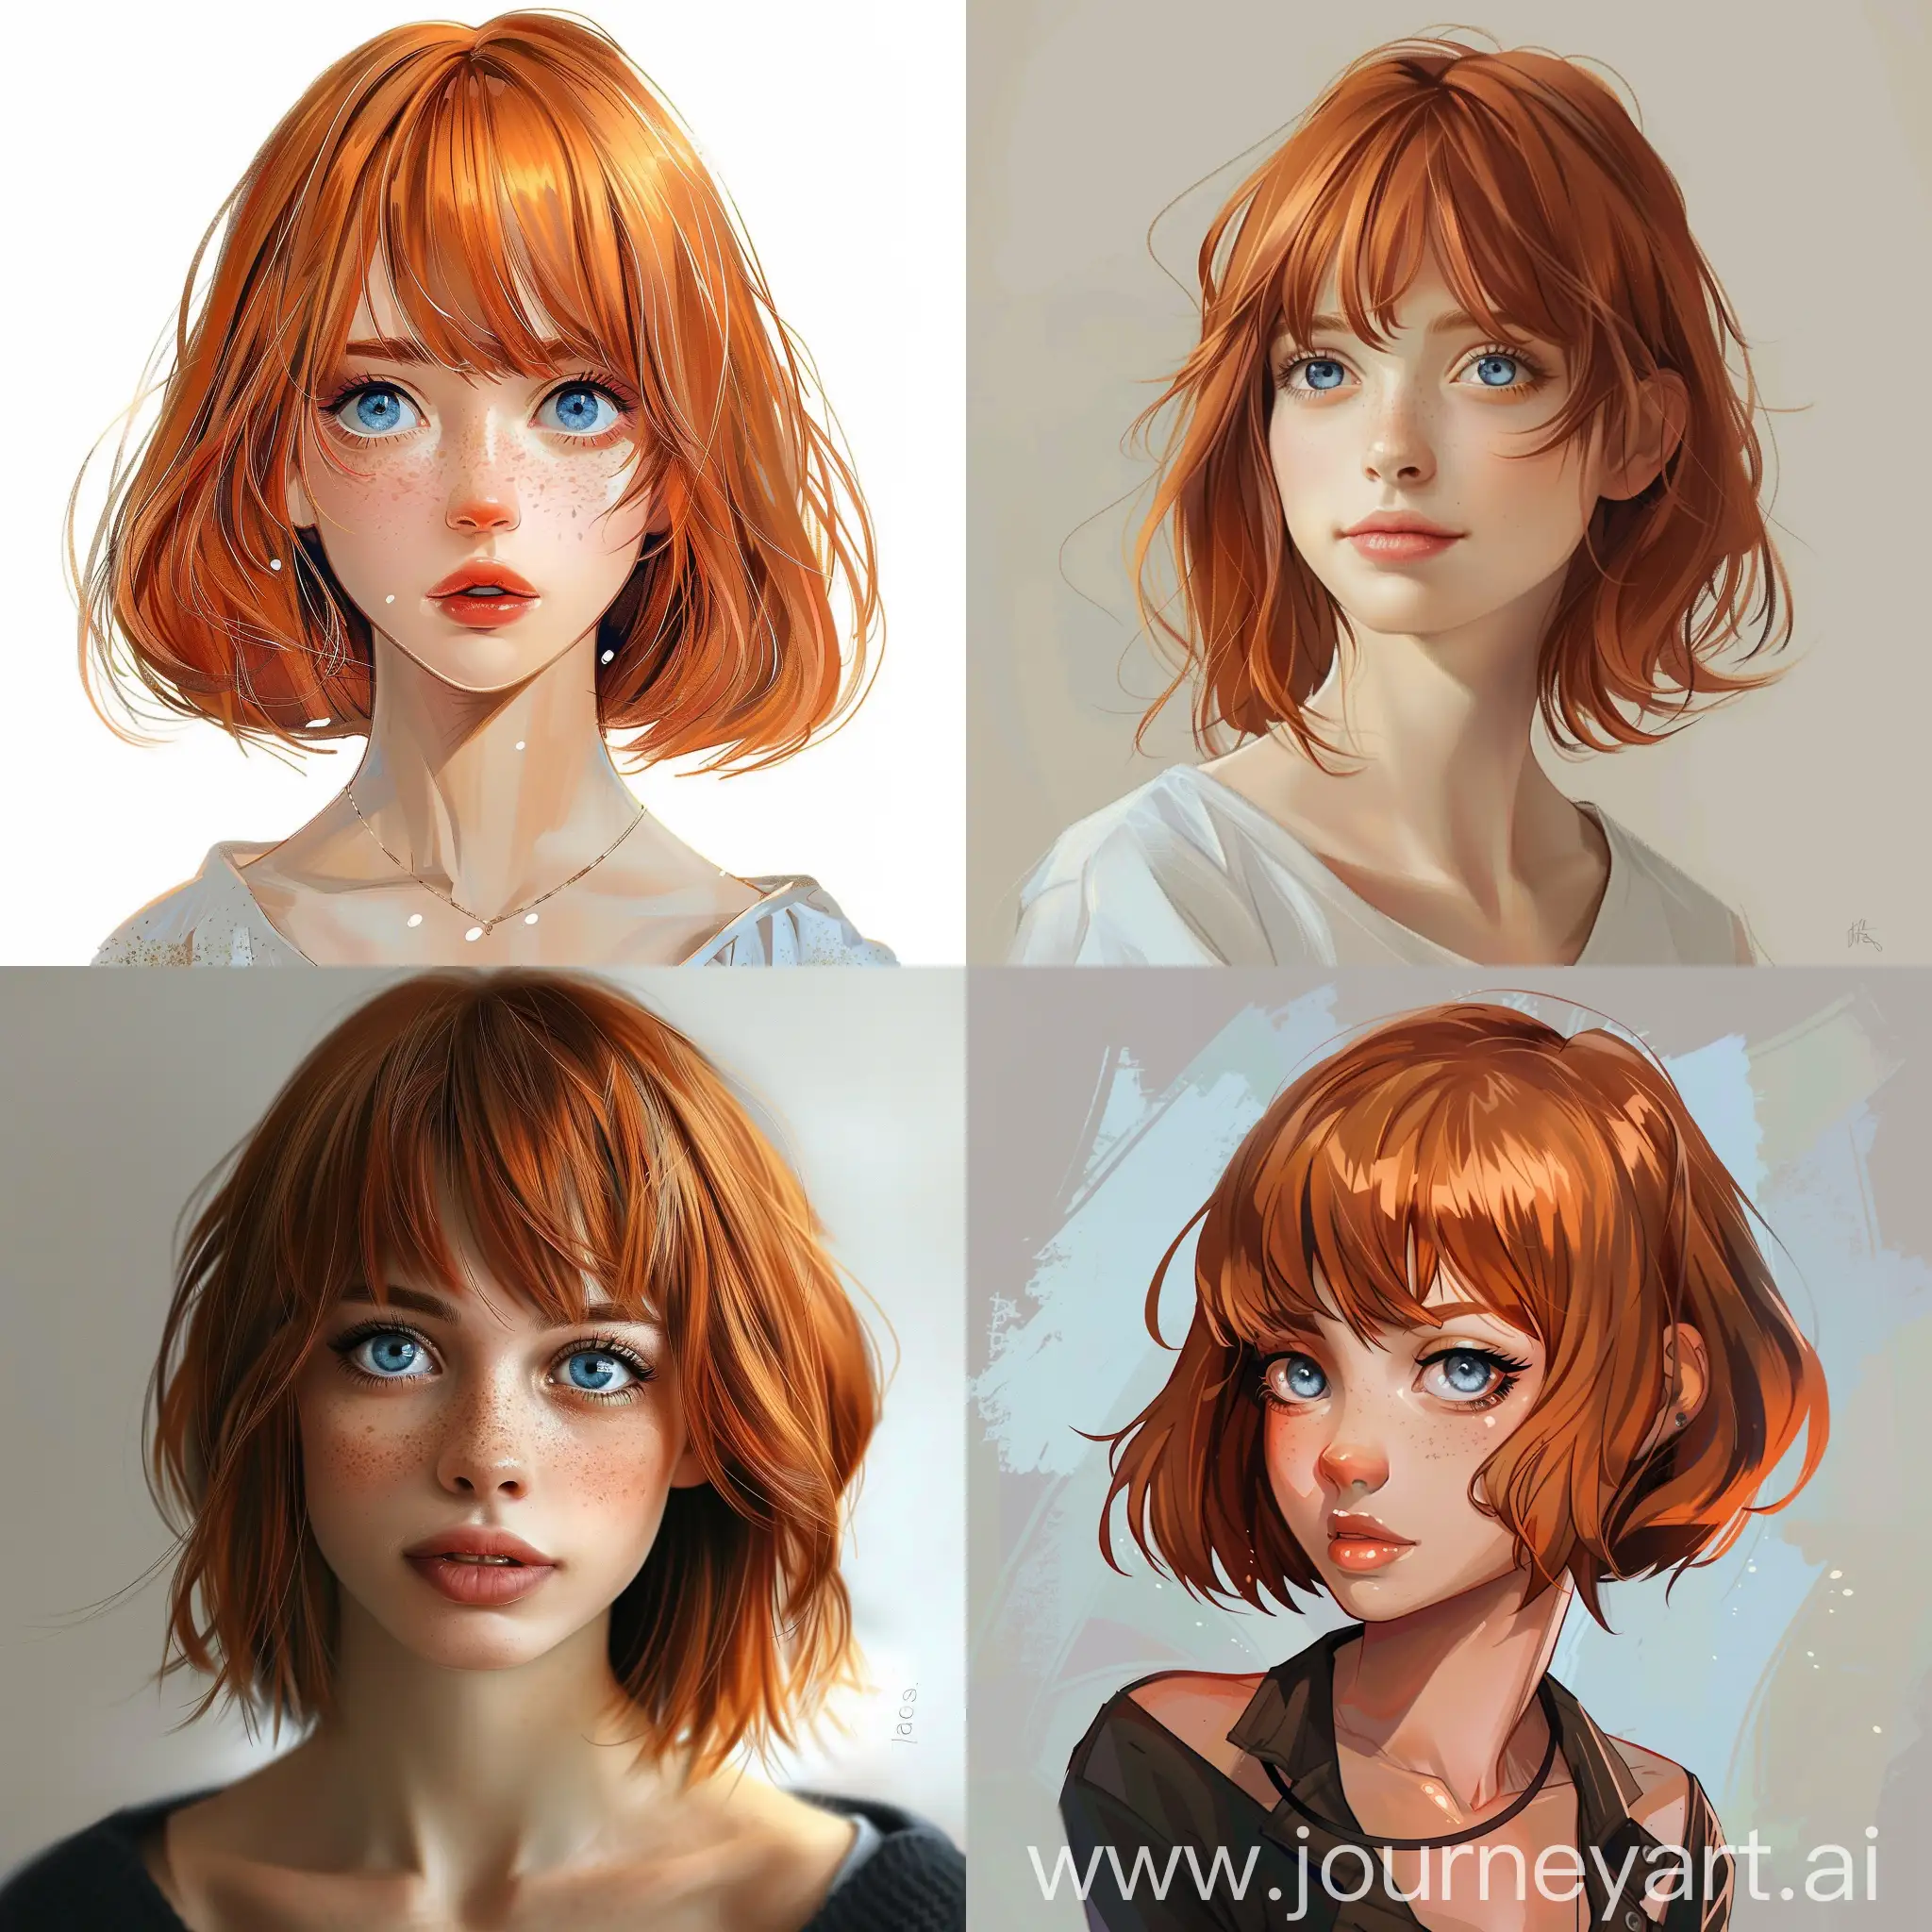 a beautiful short hair red head girl with bangs and blue eyes, realistic style

